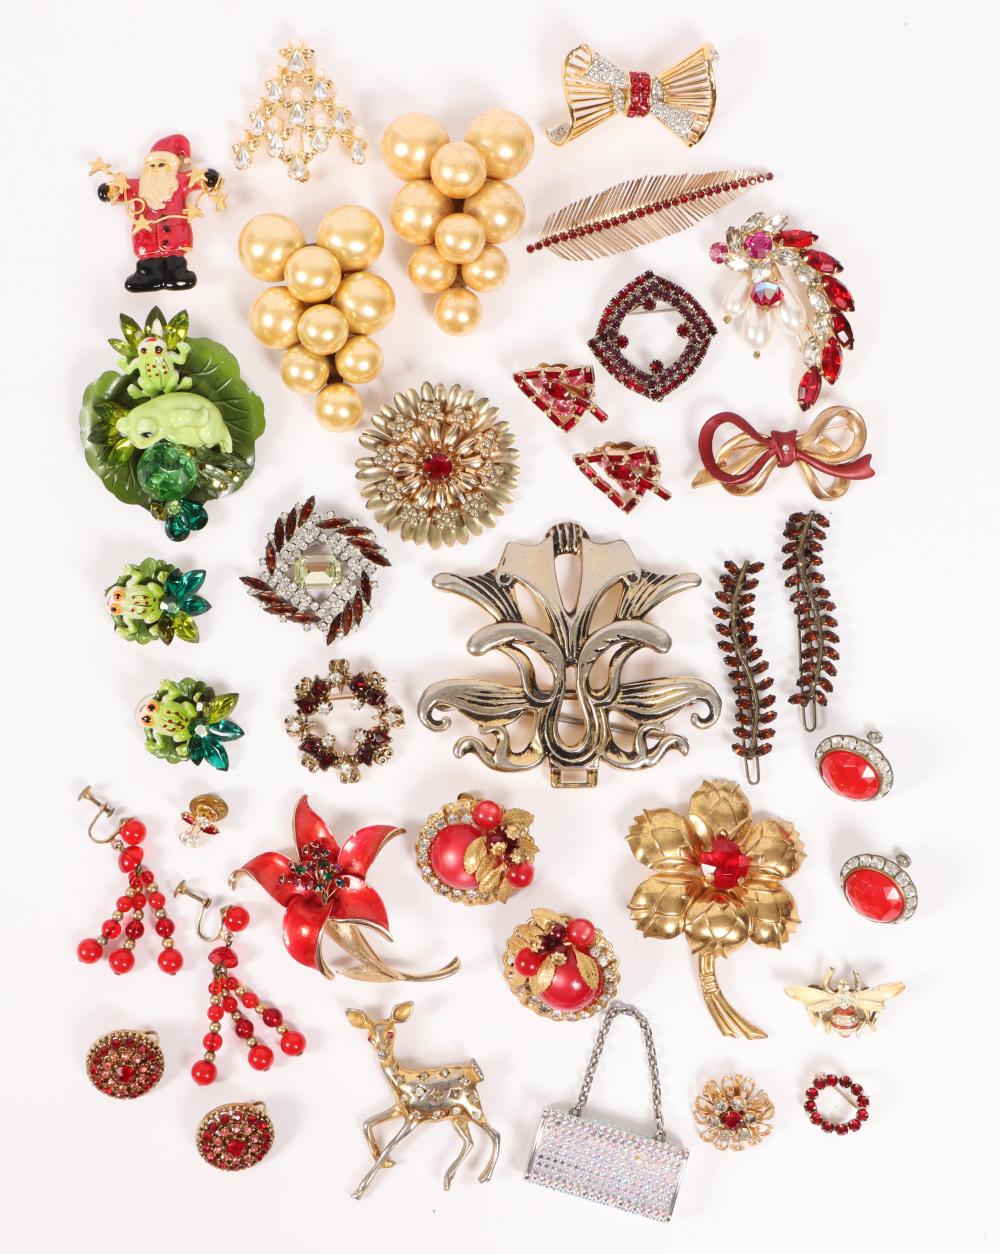 VINTAGE COSTUME JEWELRY AND ACCESSORY 30a481